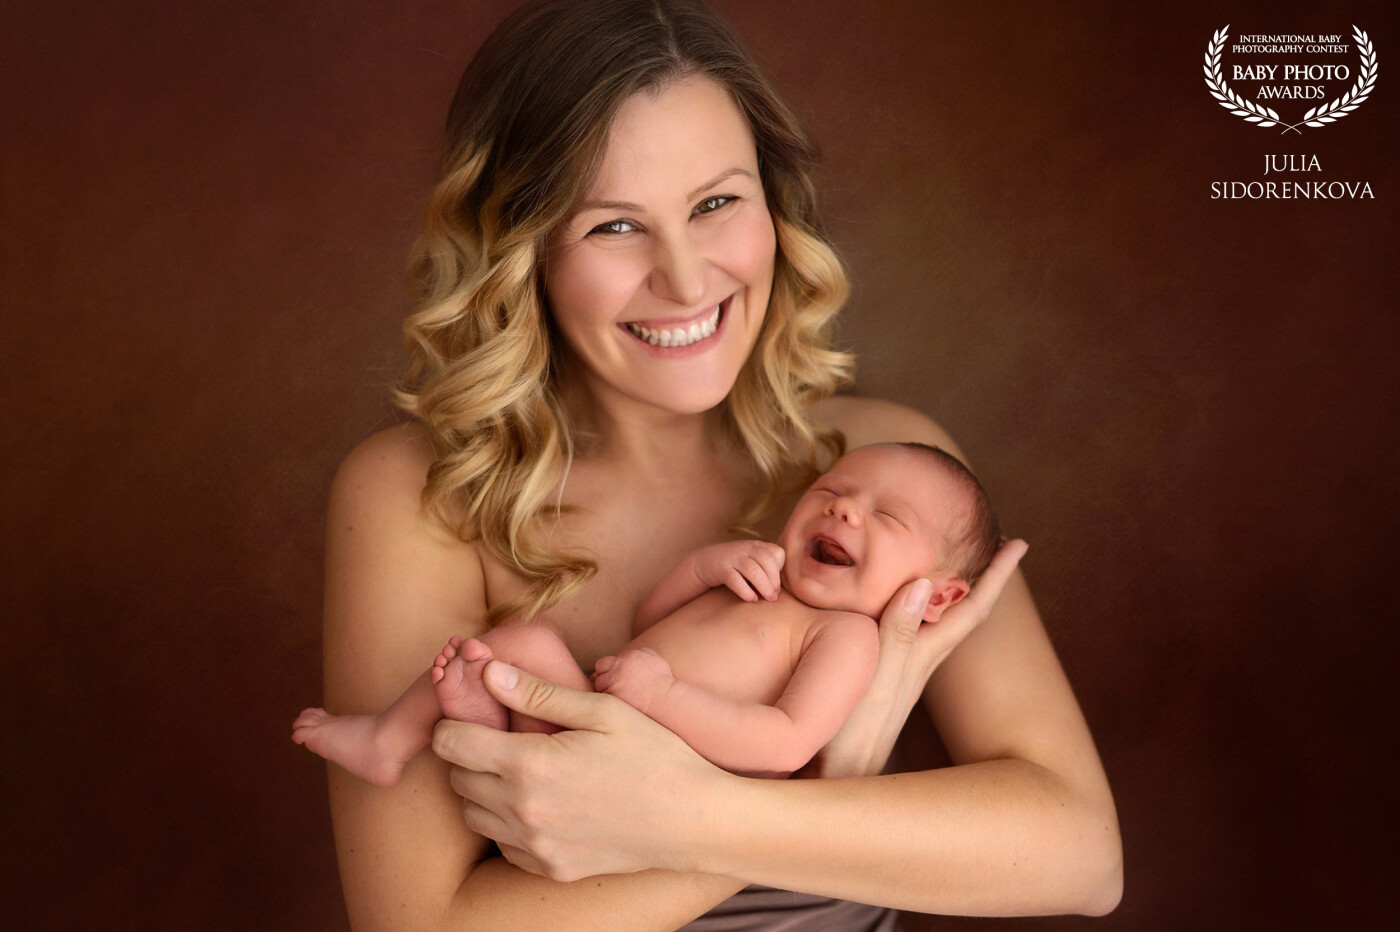 What a magical moment in the newborn photosession: the baby and his mommy smiling so beautifully at the same time!